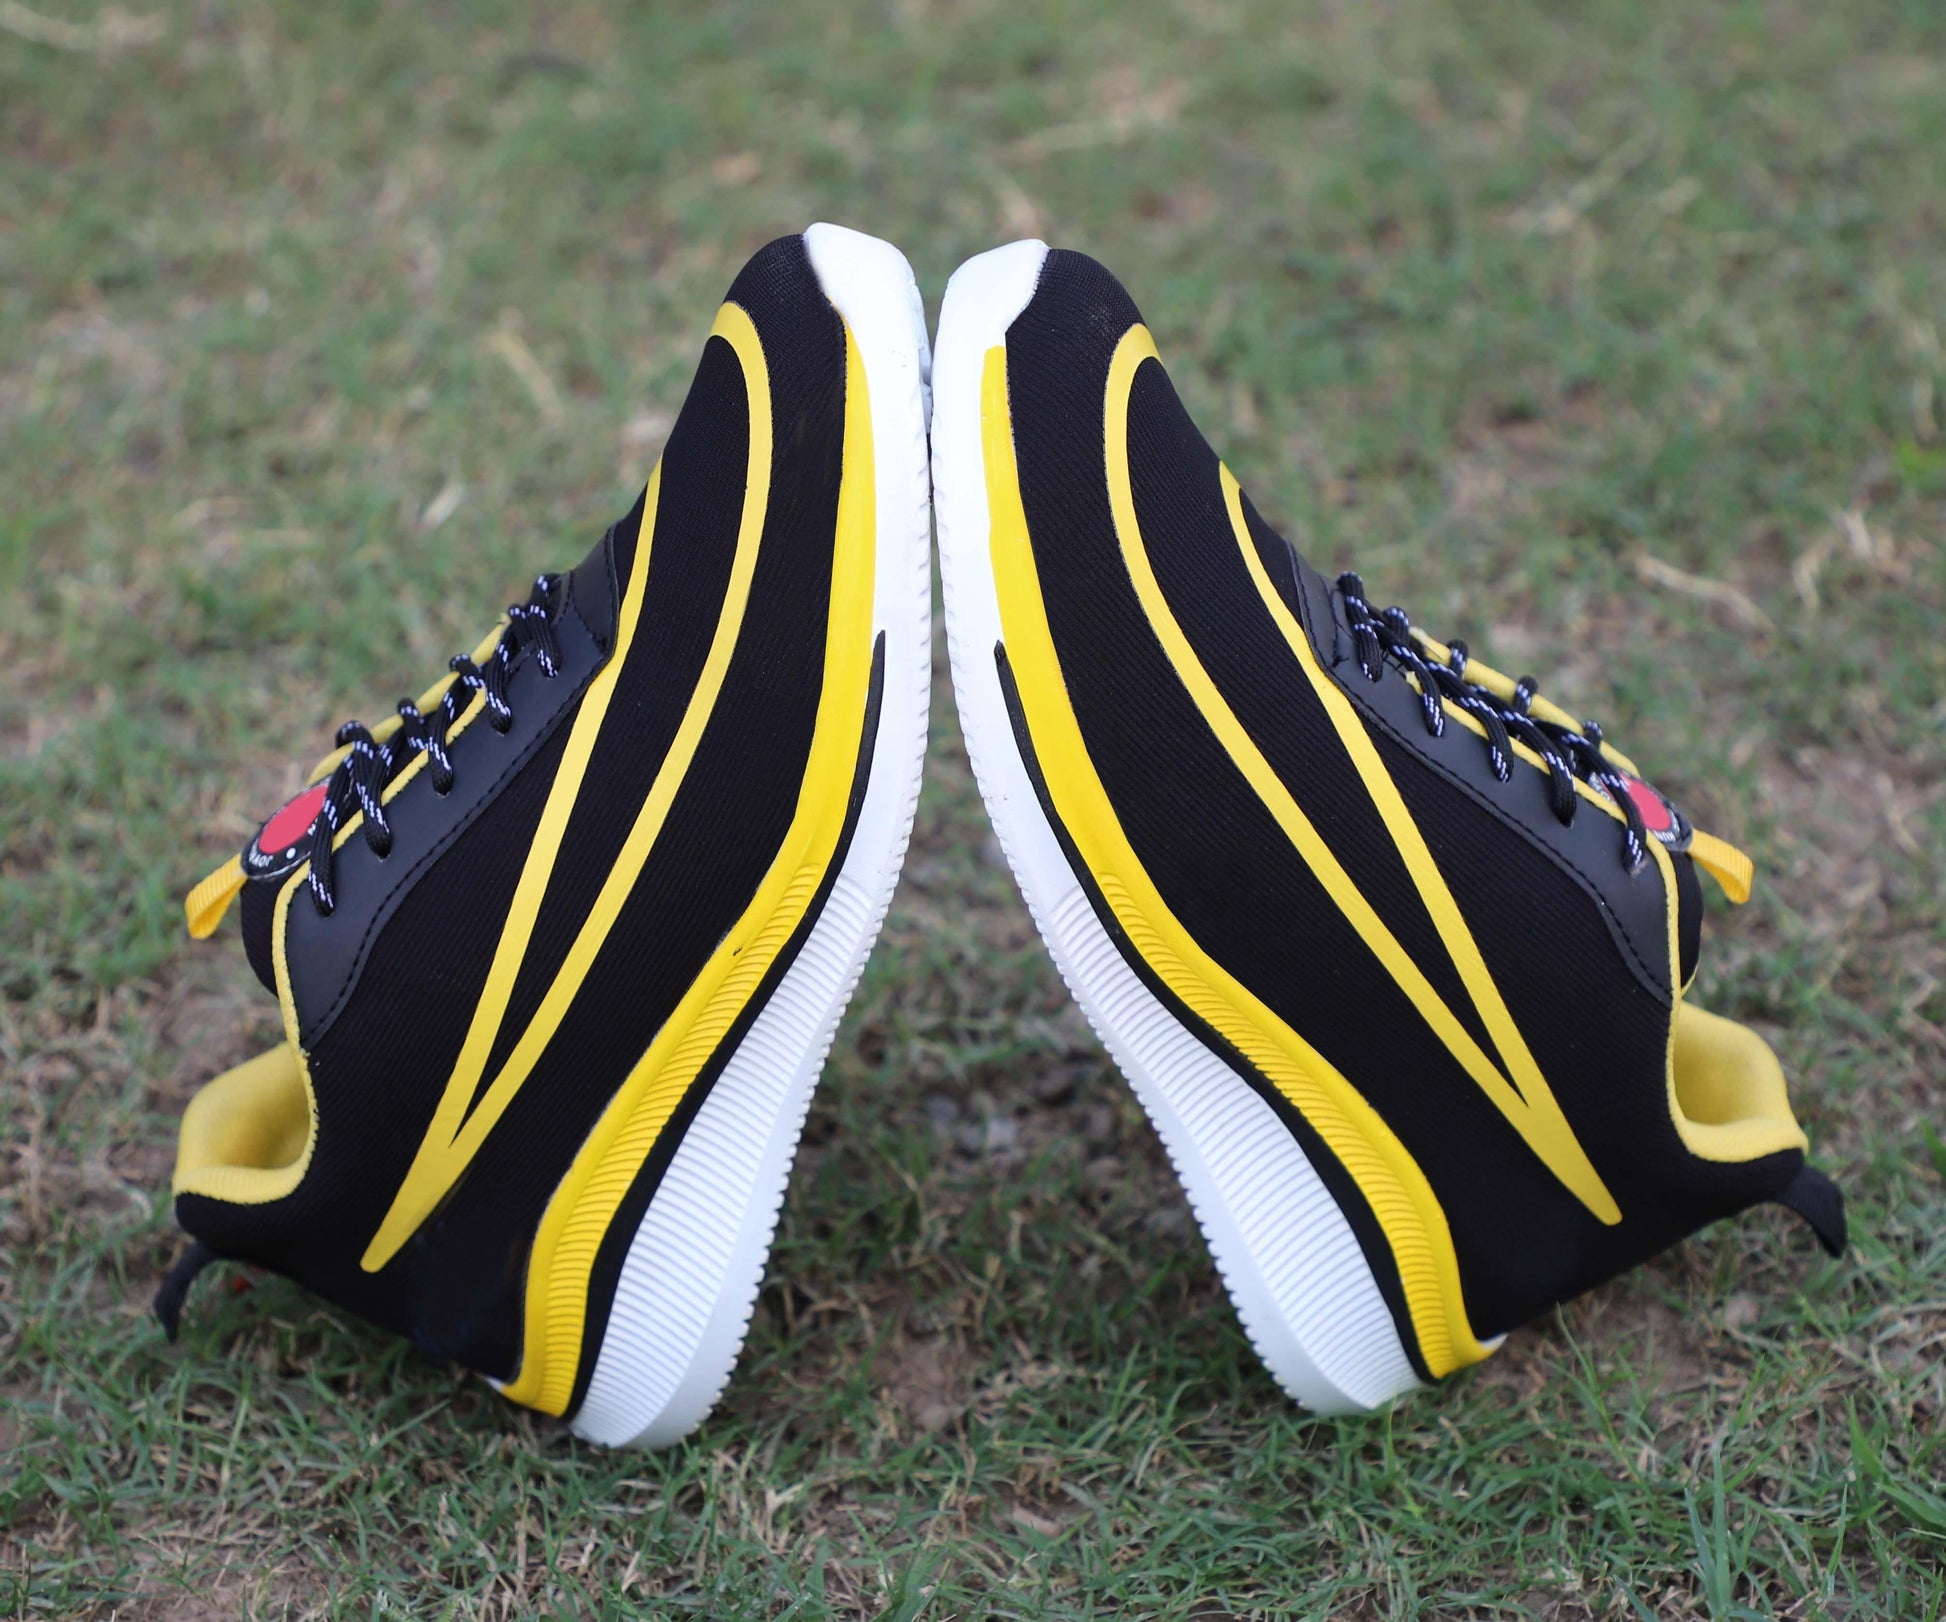 WIN9 Men Yellow Casual Laceup Comfortable Sports Shoes - Deal IND.